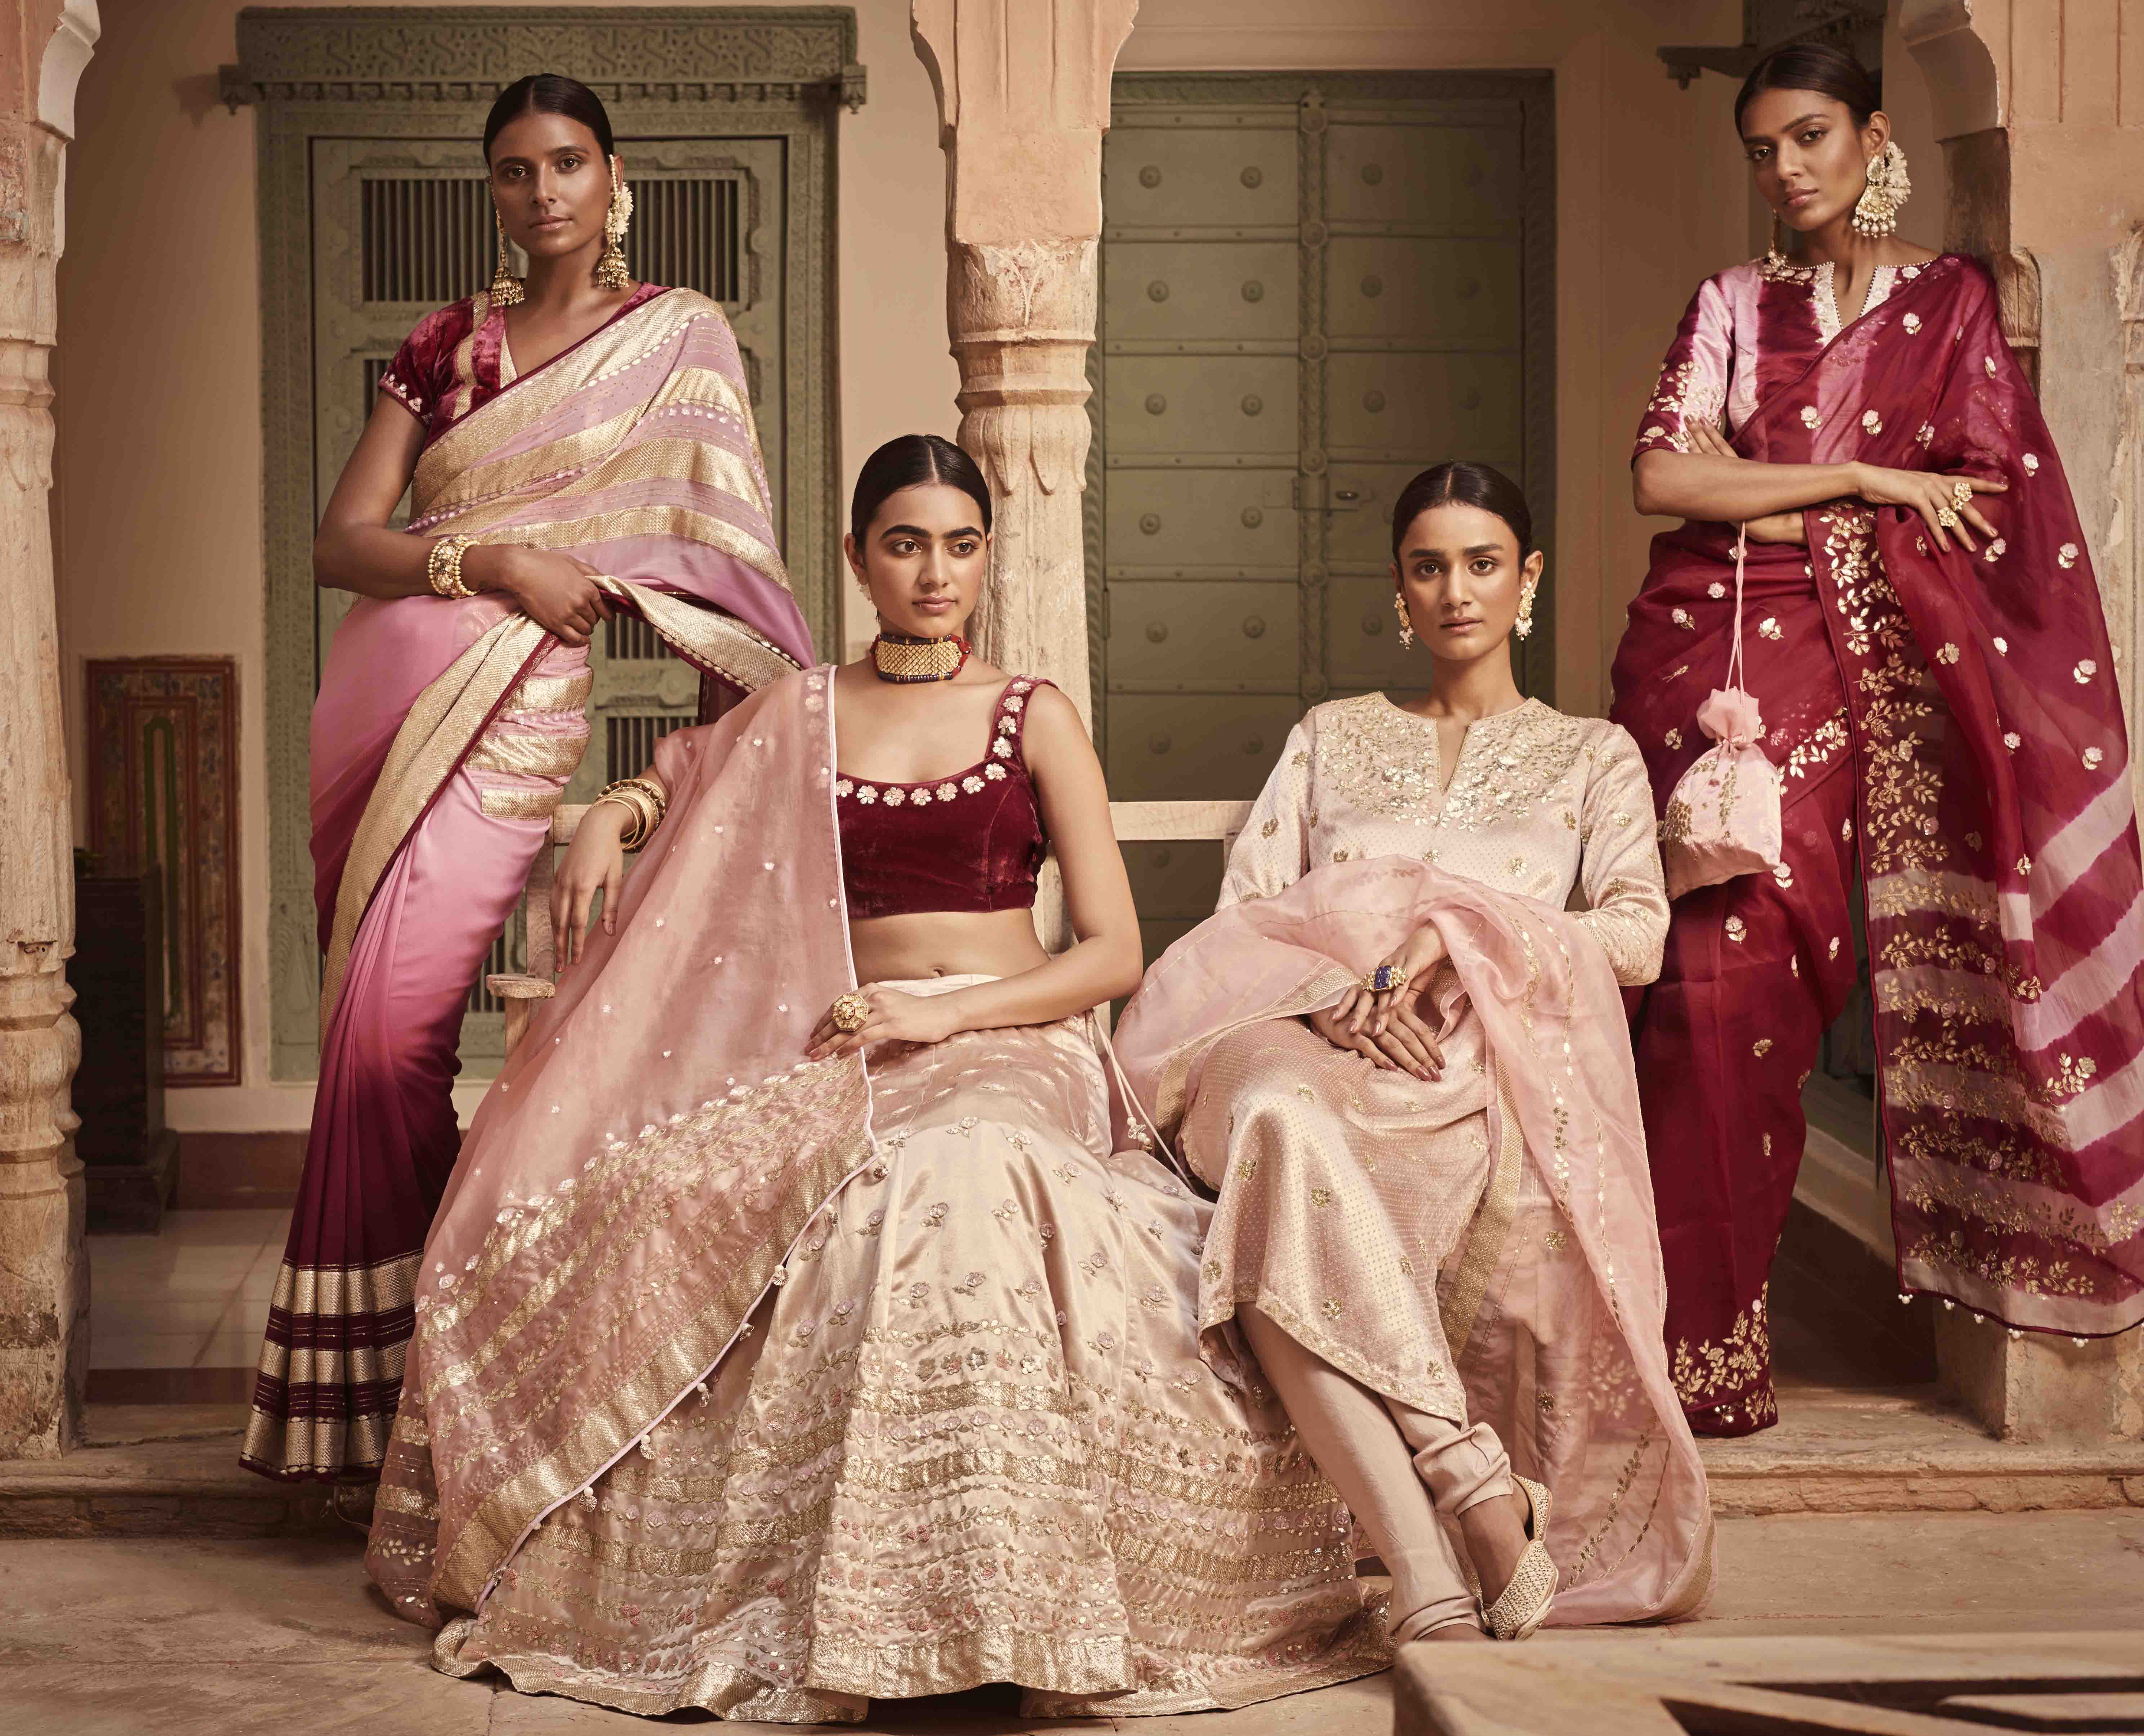 Luxury brands launch Diwali capsule collections for the festive season